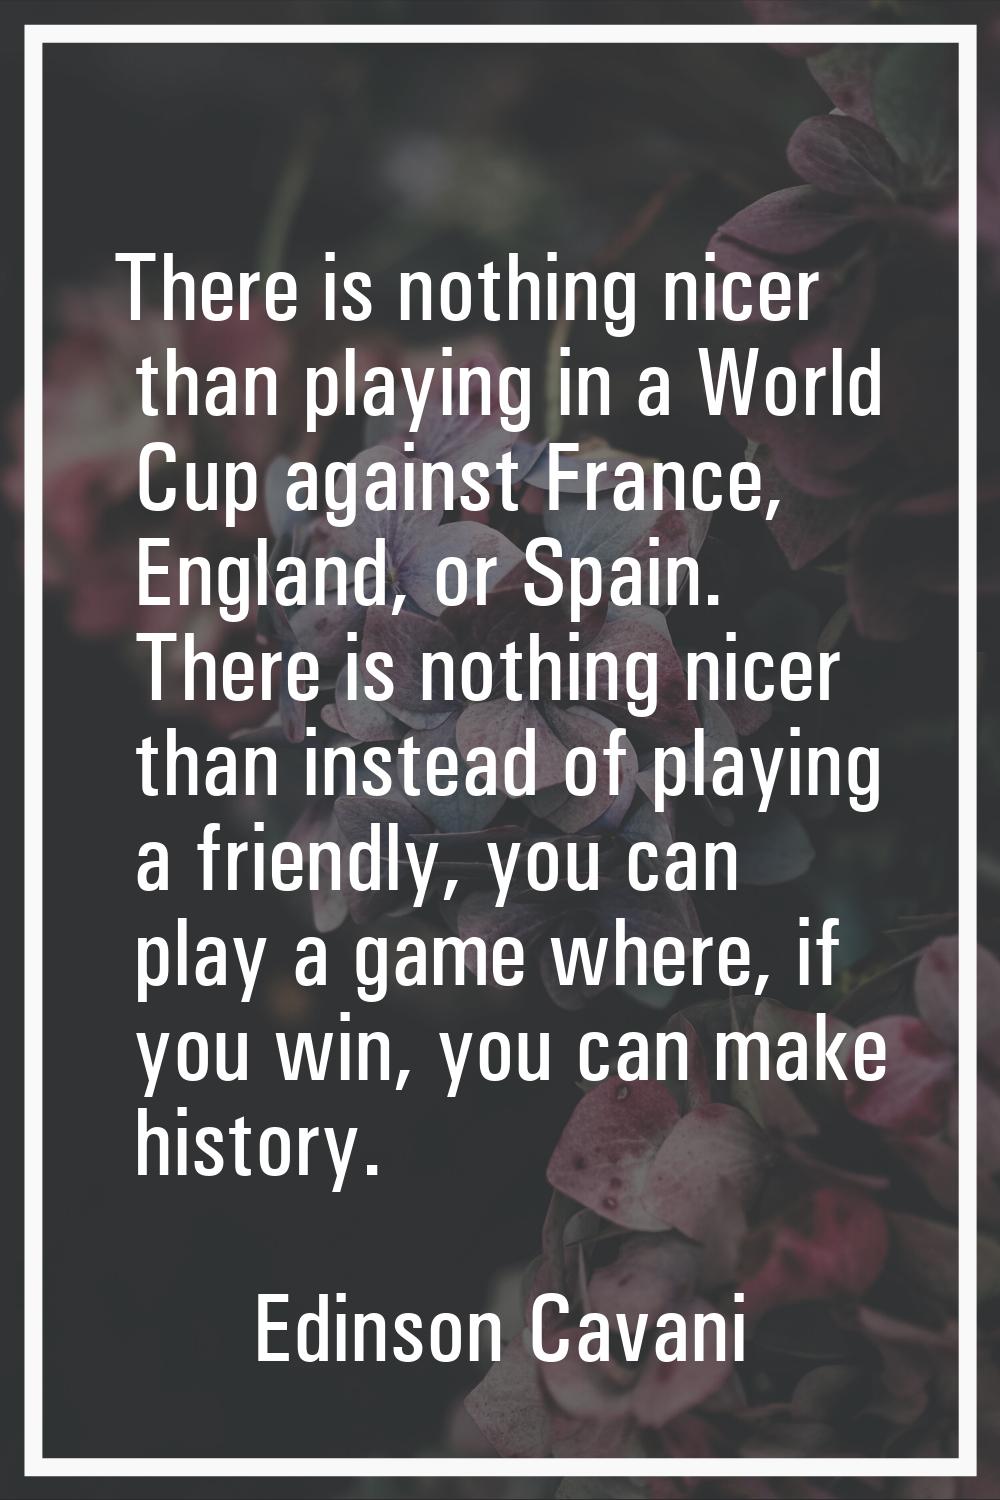 There is nothing nicer than playing in a World Cup against France, England, or Spain. There is noth